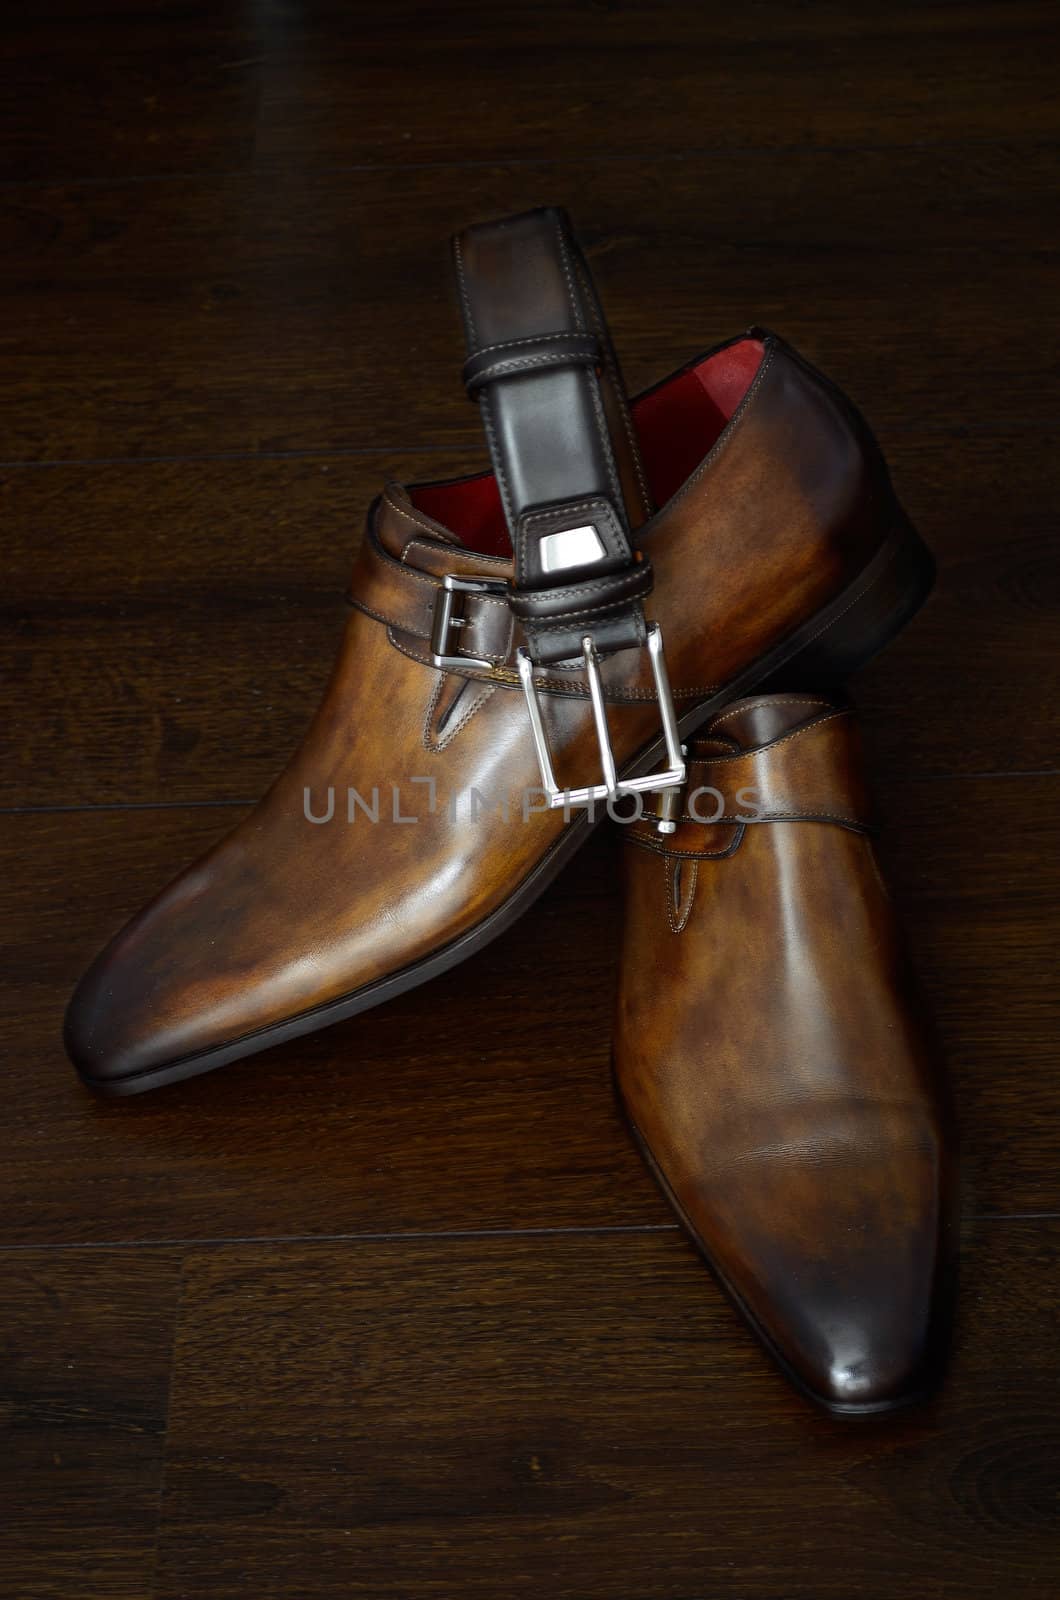 Luxury italian style brown leather shoes and belt for him against a dark background.